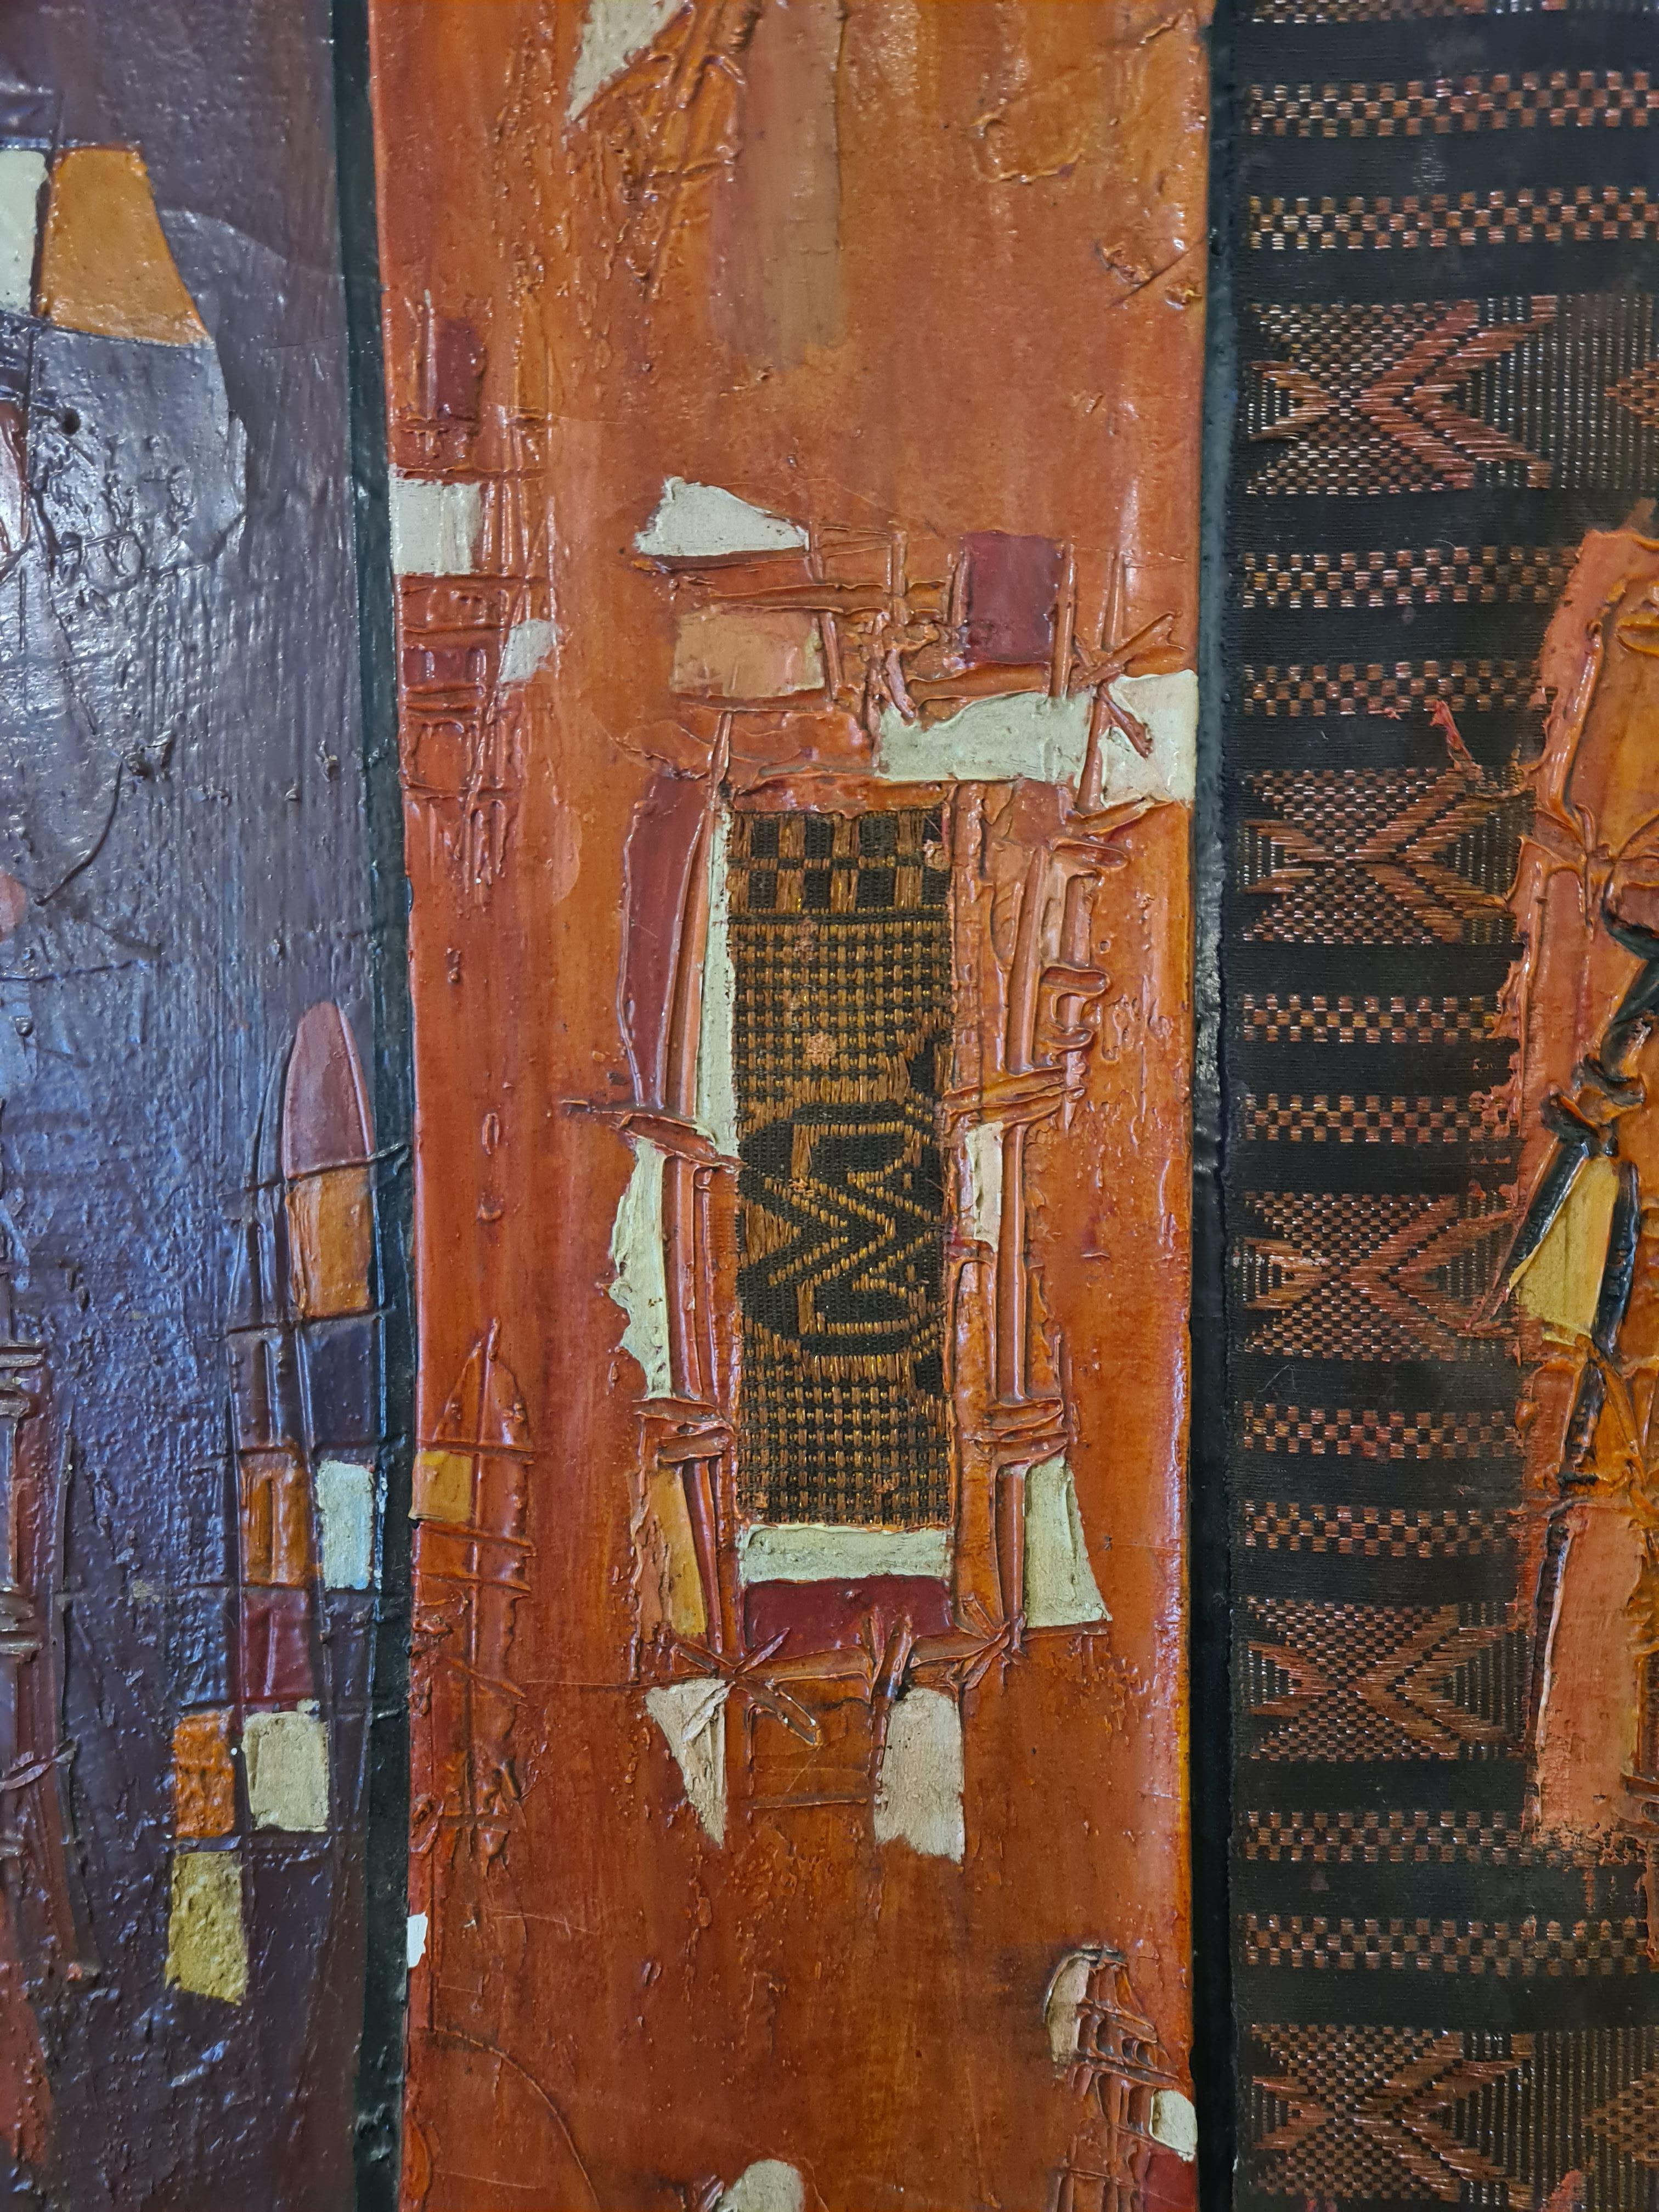 A Senegalese four panel mixed media abstract painting by Bara Ndaw. Signed bottom right. Full certificate of authenticity with date and description signed by the artist to the back of the painting.

An imposing and typical work by Bara NDAW. His